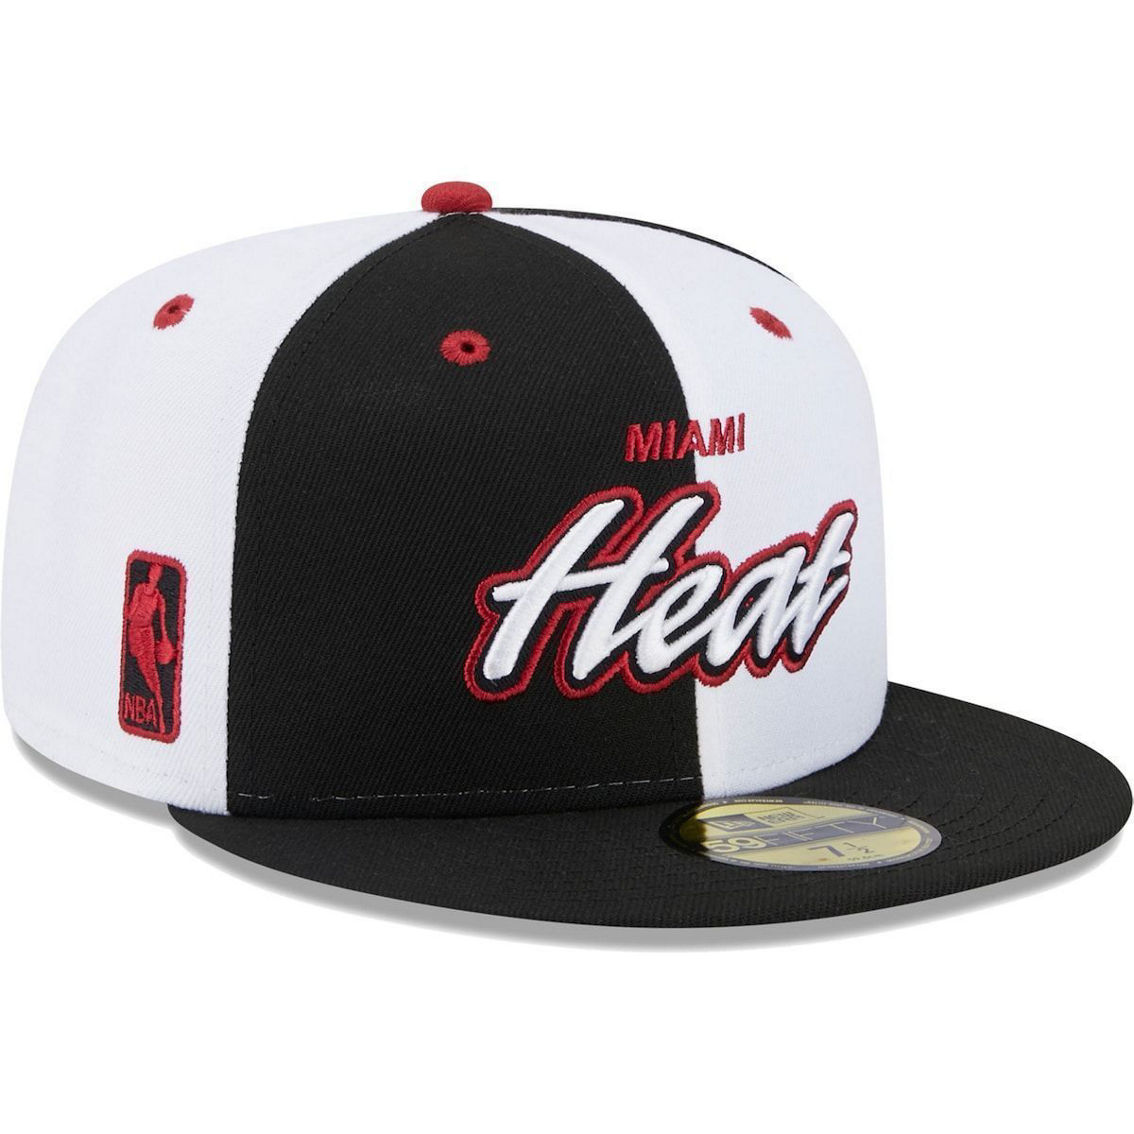 NEW VINTAGE NEW ERA NBA MIAMI HEAT WHITE FITTED HAT SIZE 7 1/2